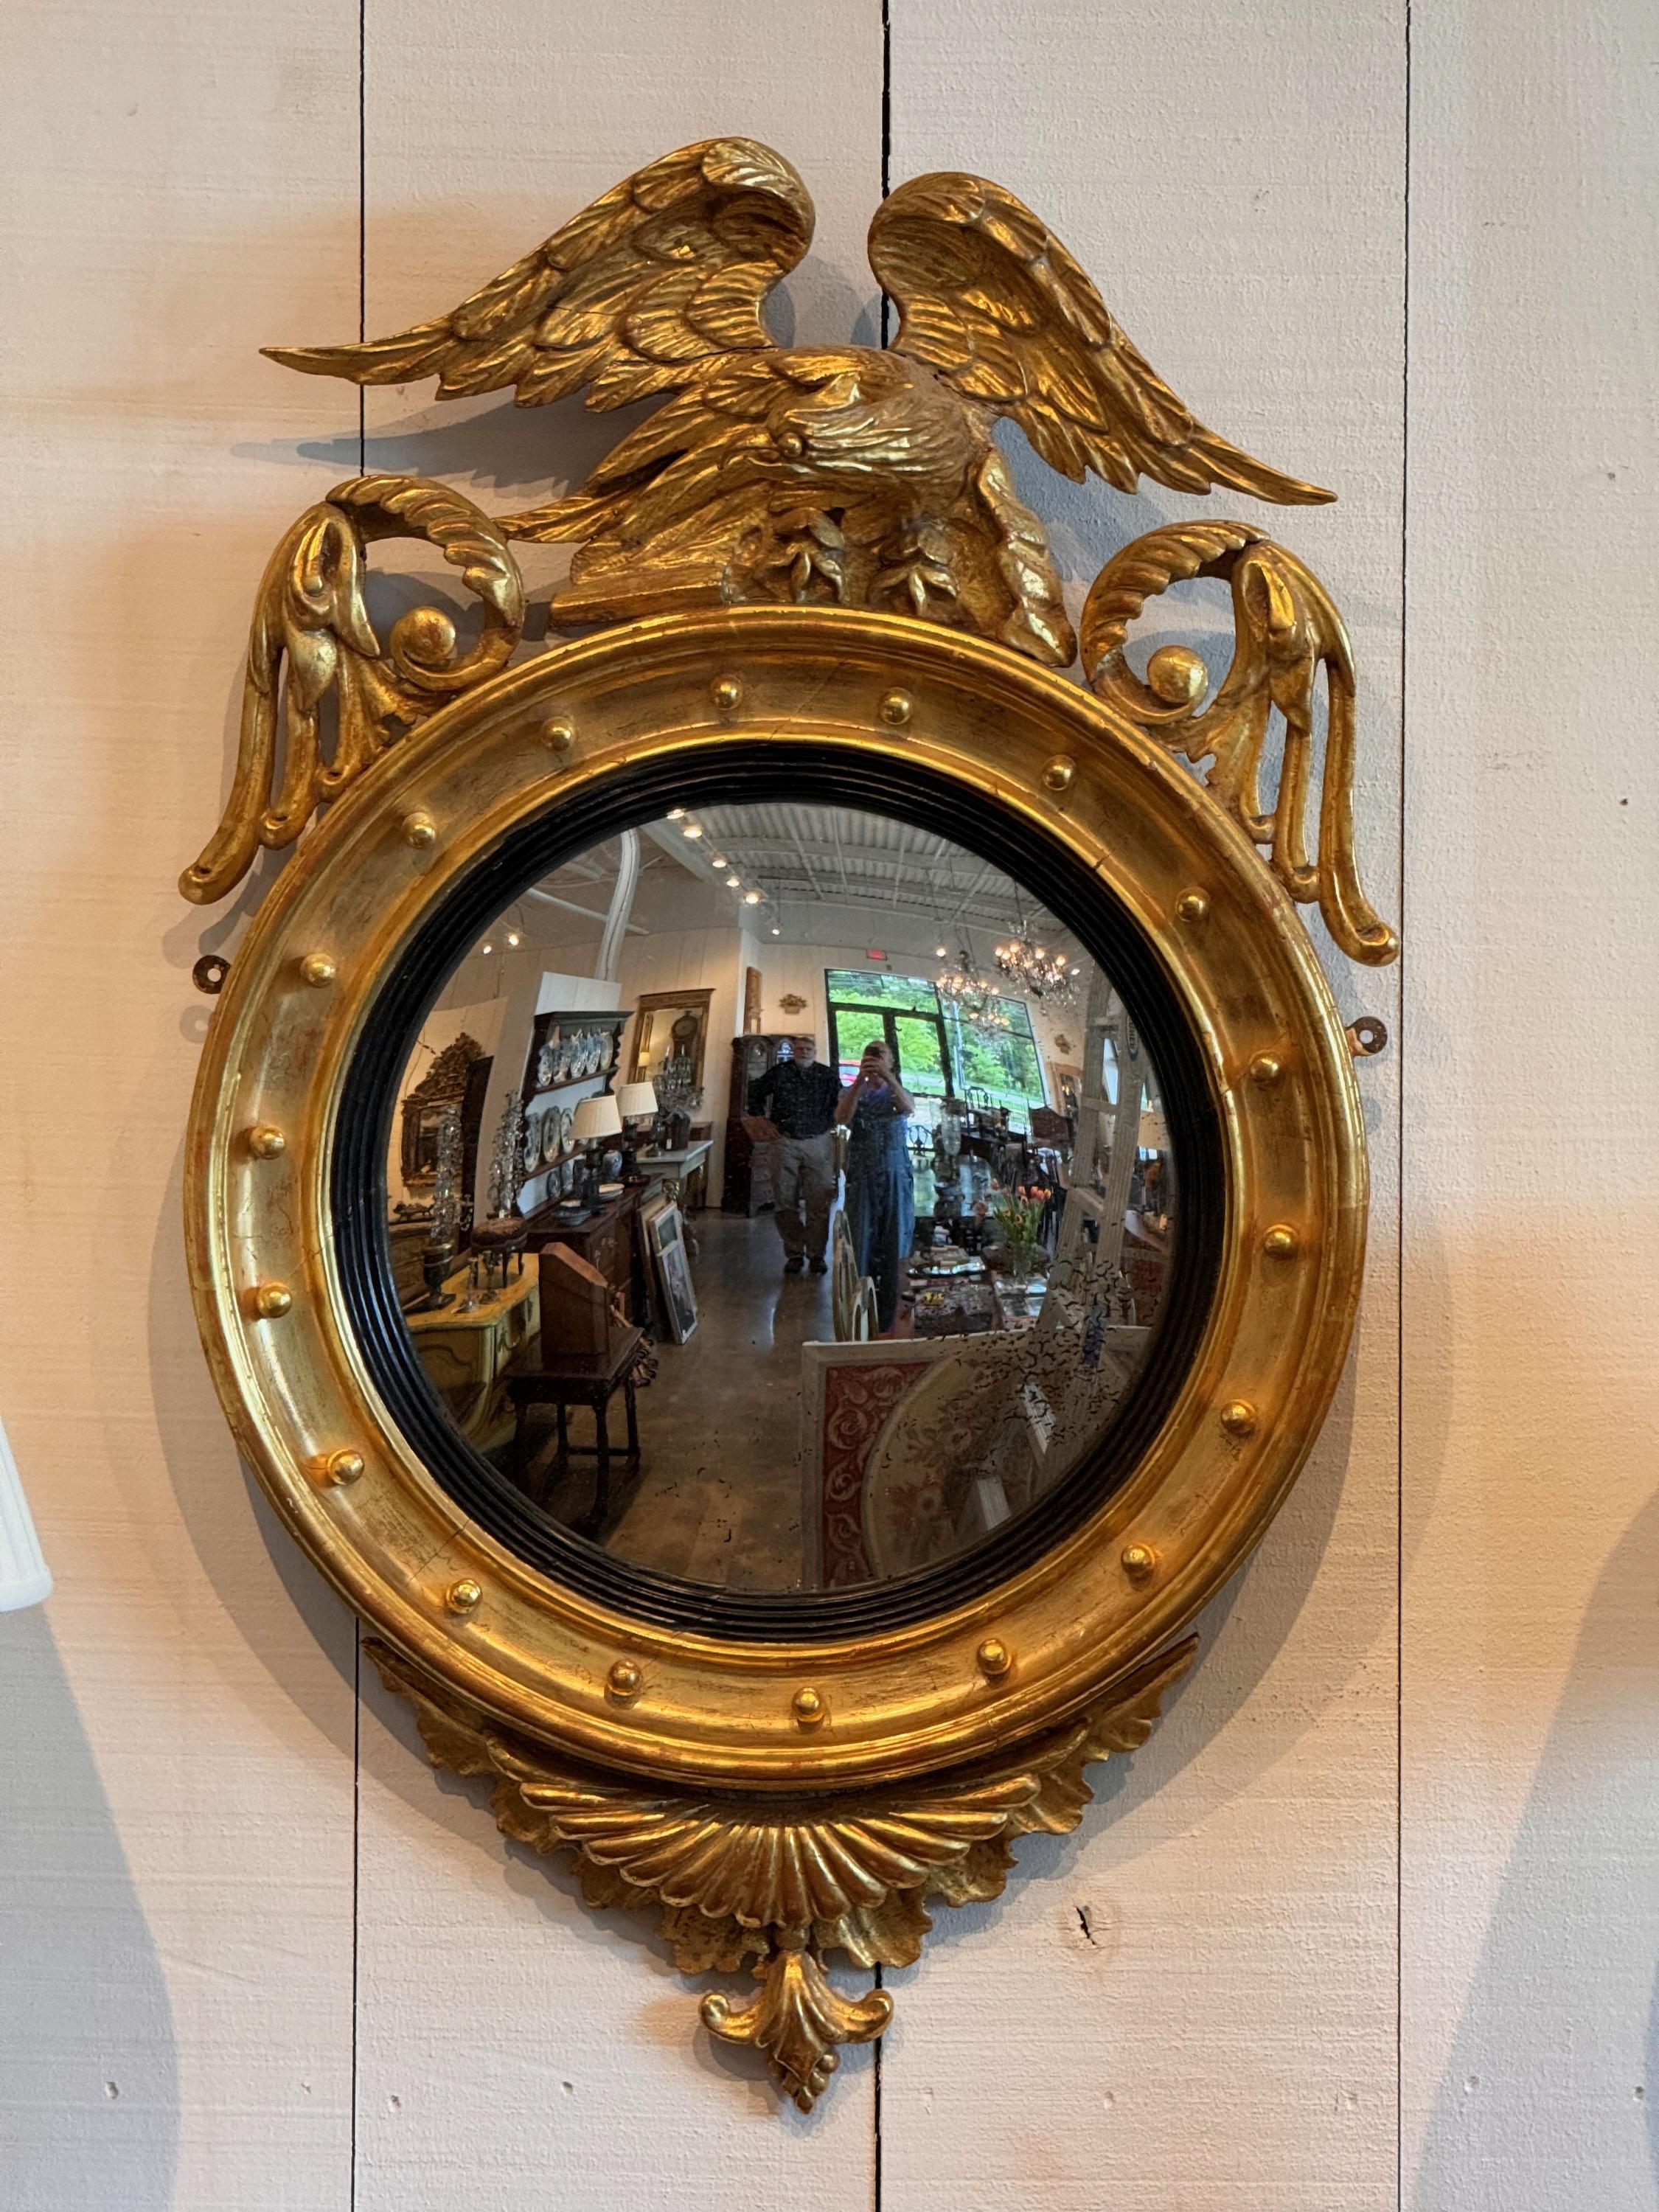 An impressive bullseye mirror. Great gilding and carving..